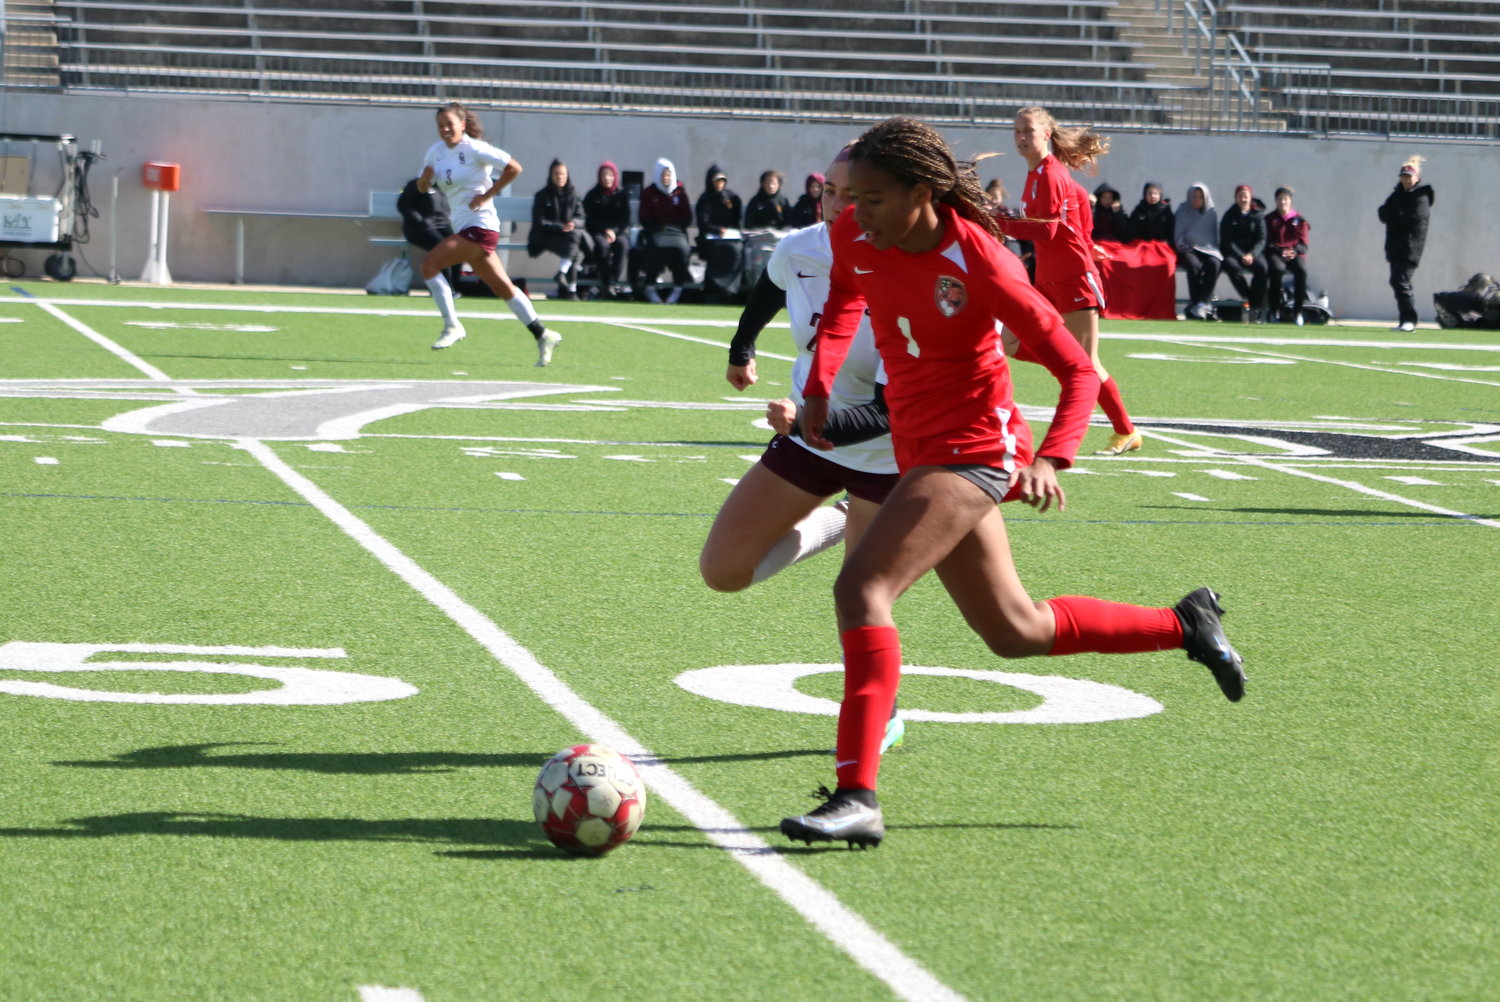 Olyvia Witham dribbles the ball during a game between Katy and Dripping Springs at Legacy Stadium on Saturday.